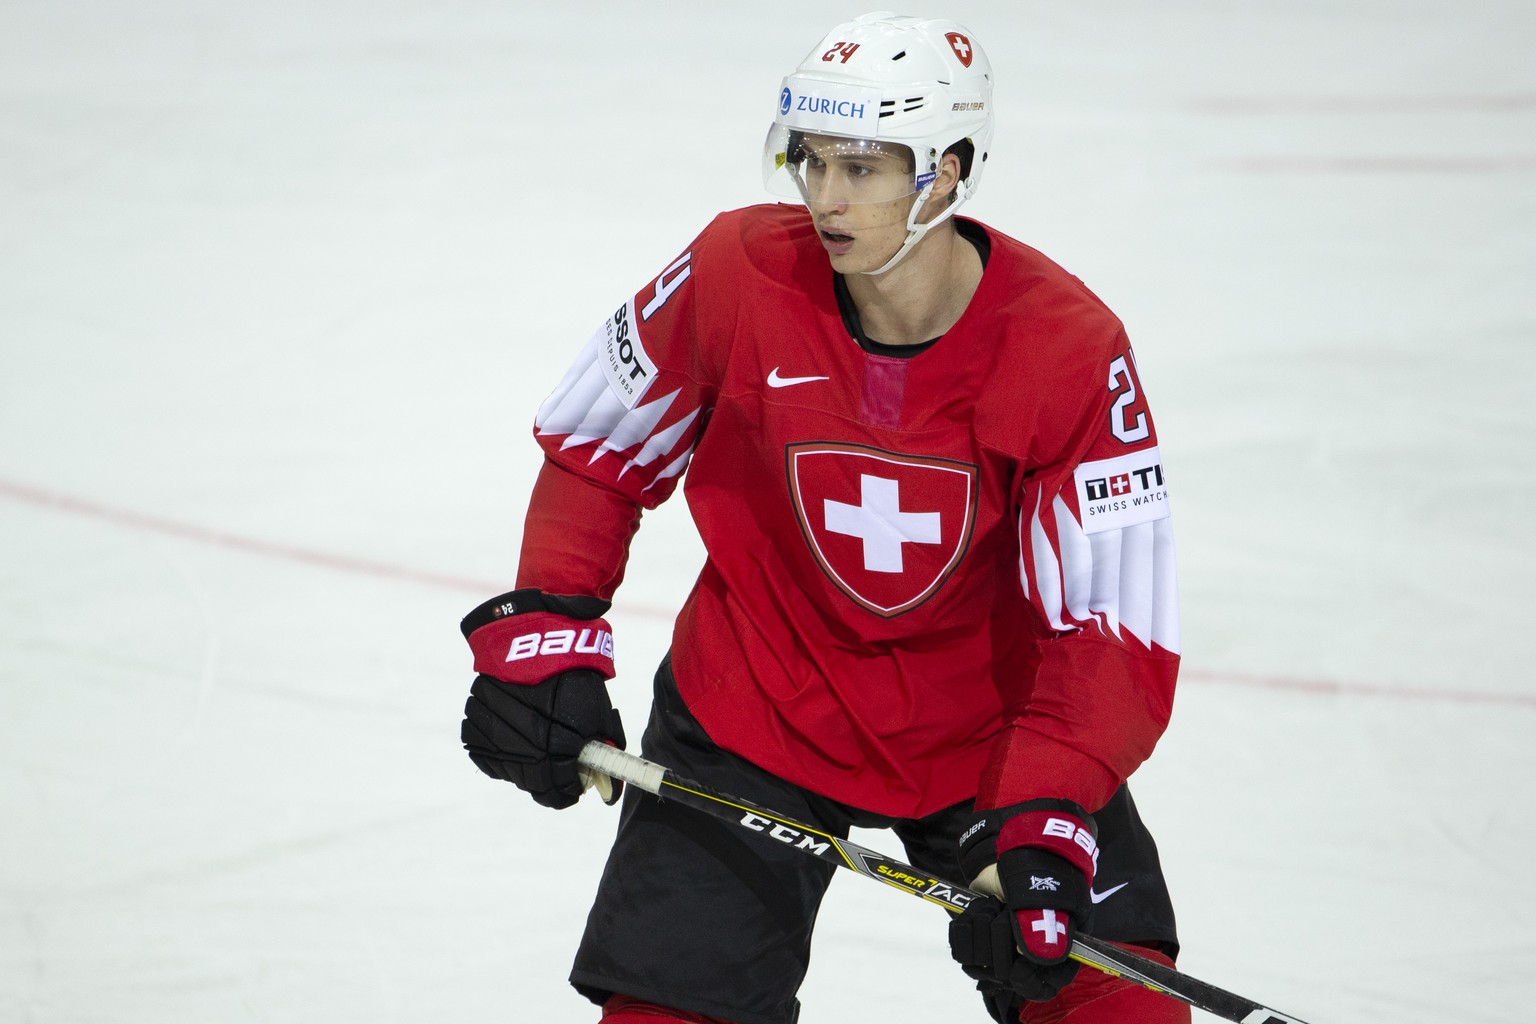 Switzerland's defender Tobias Geisser look his teammates, during the IIHF 2021 World Championship preliminary round game between Switzerland and Slovakia, at the Olympic Sports Center, in Riga, Latvia ...